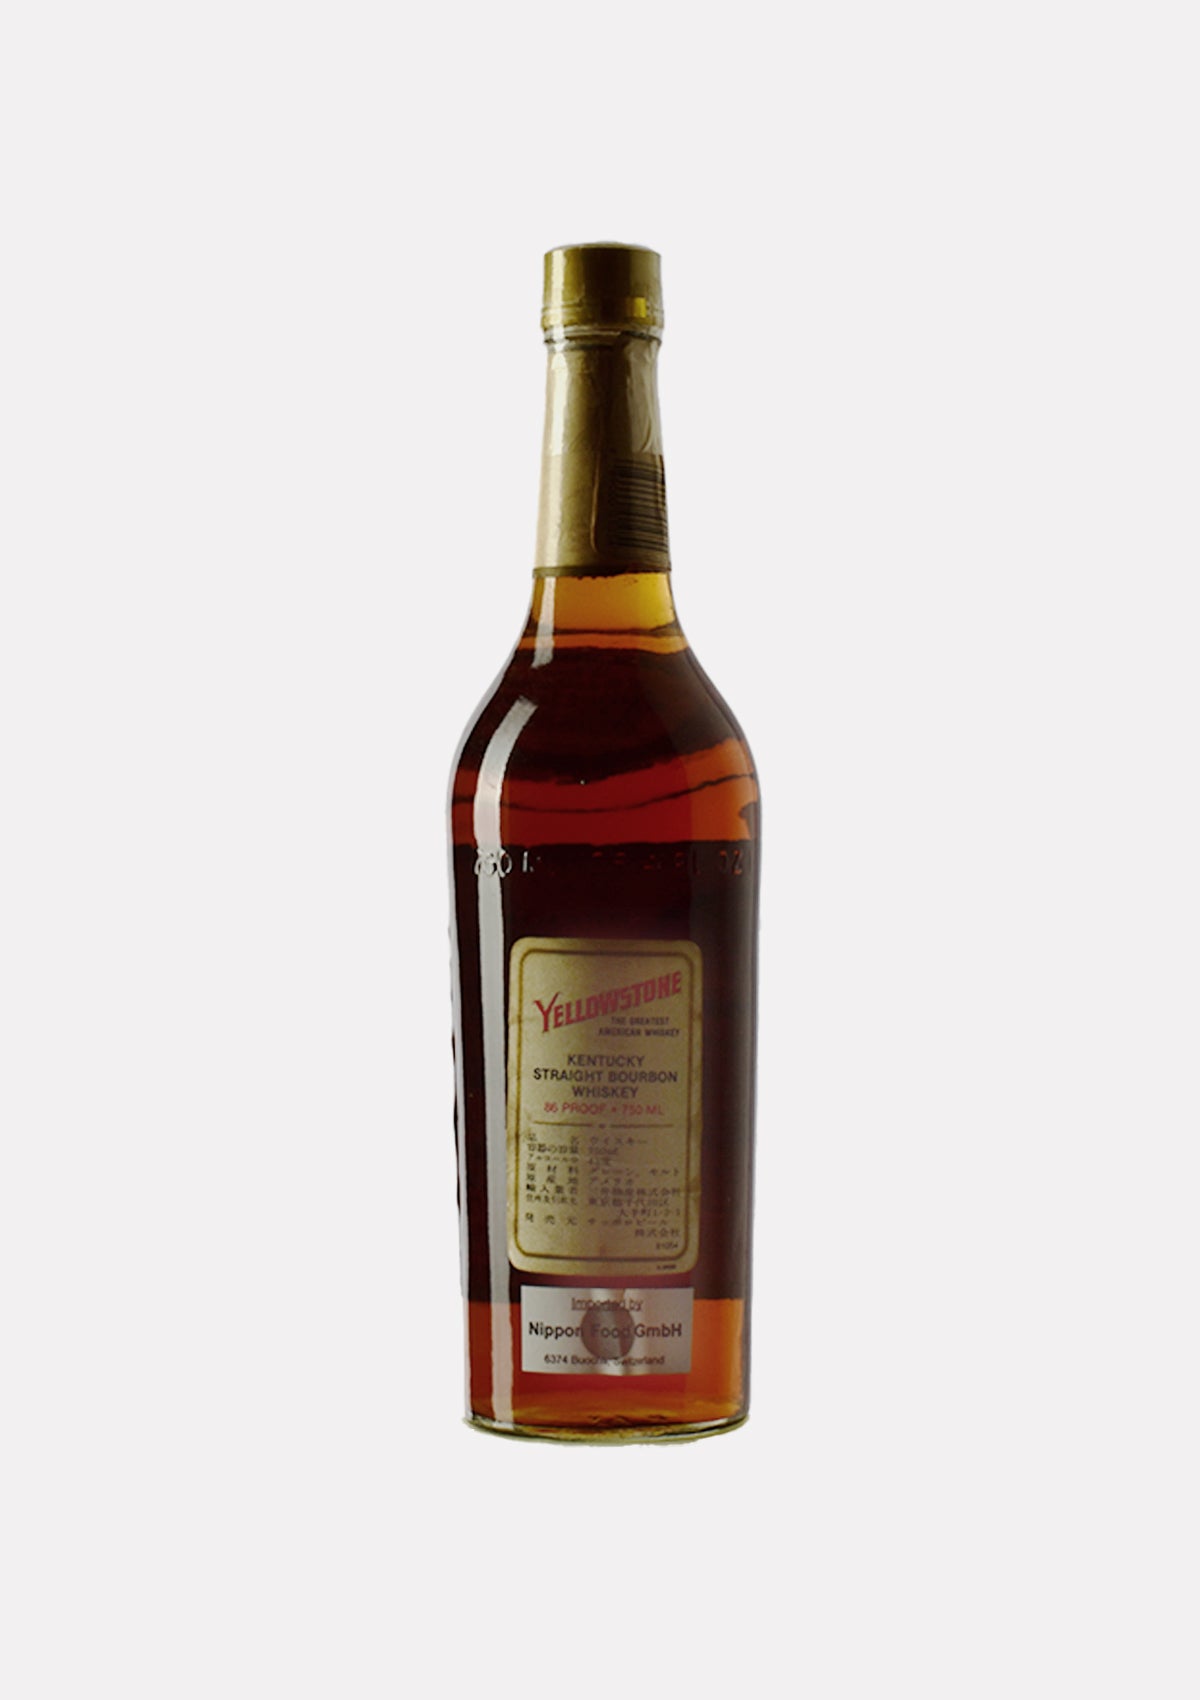 Yellowstone Tradition of Excellence Bourbon